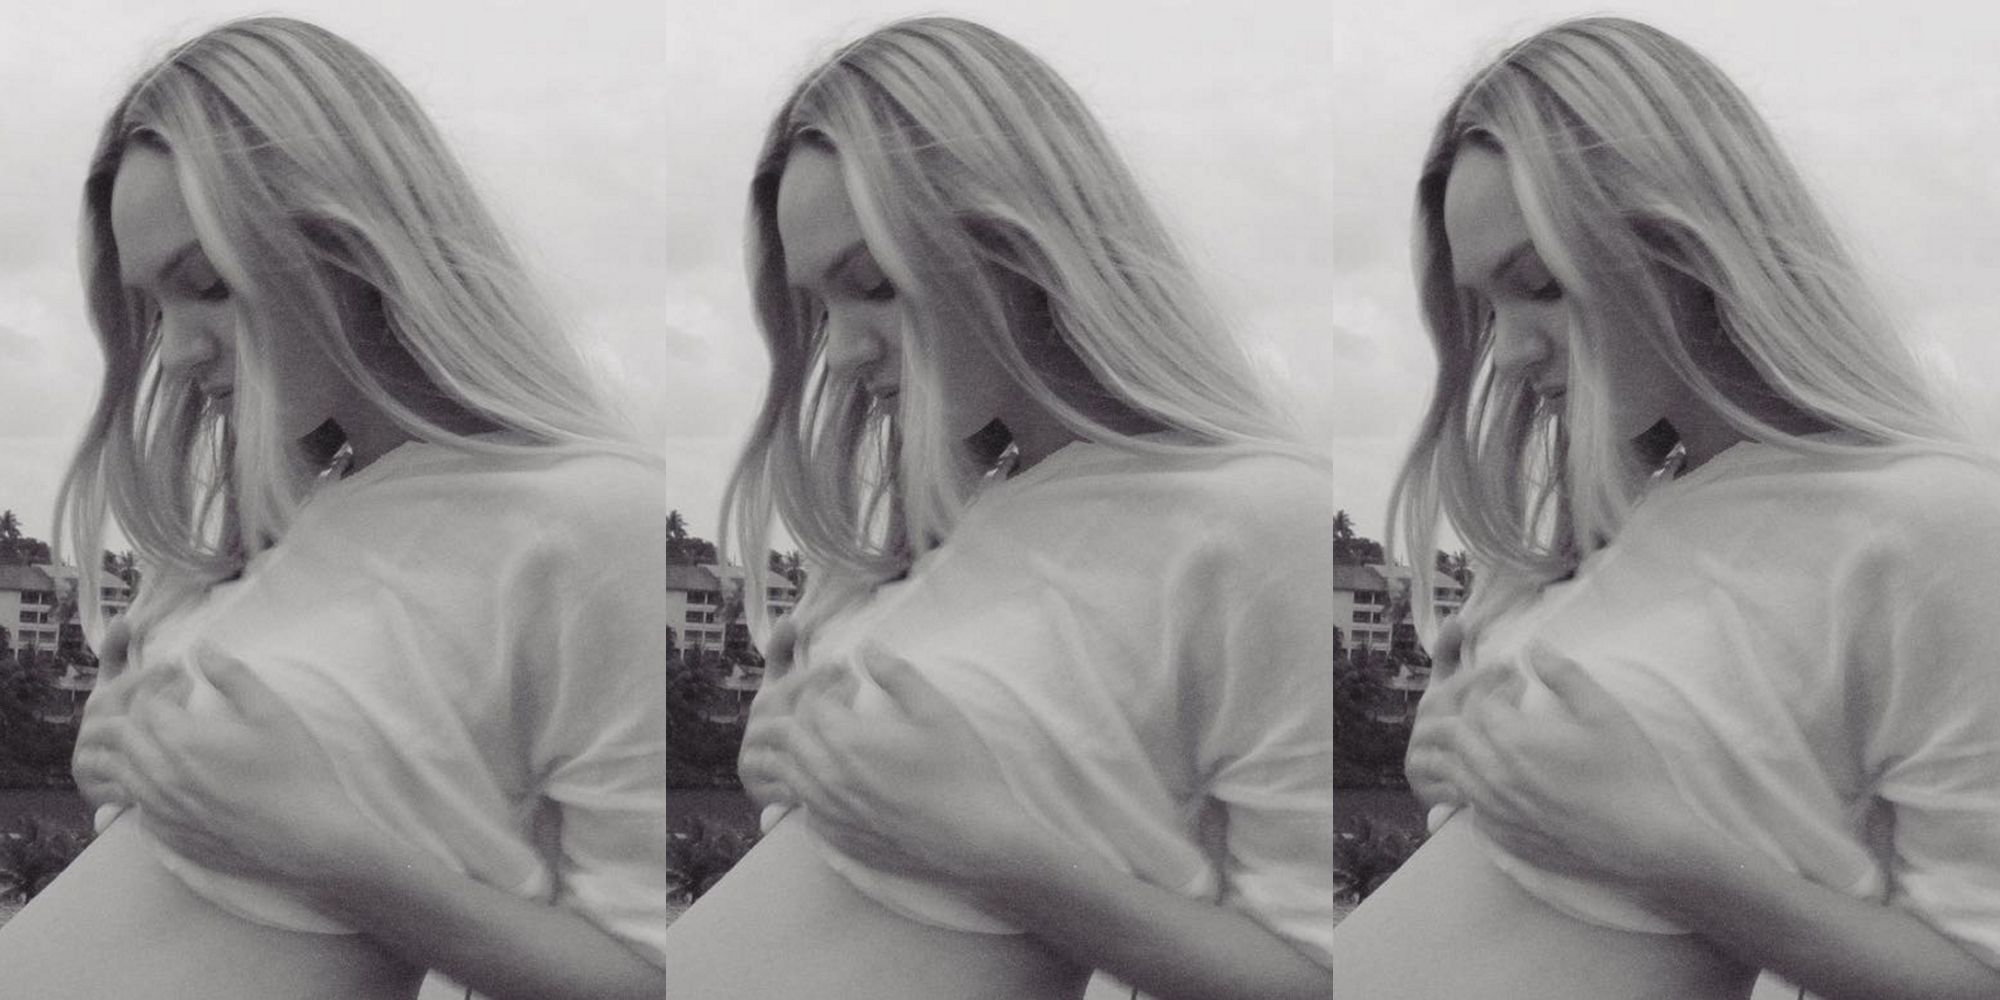 Candice Swanepoel Just Shared The First Photo Of Her Baby Bump—Come See!